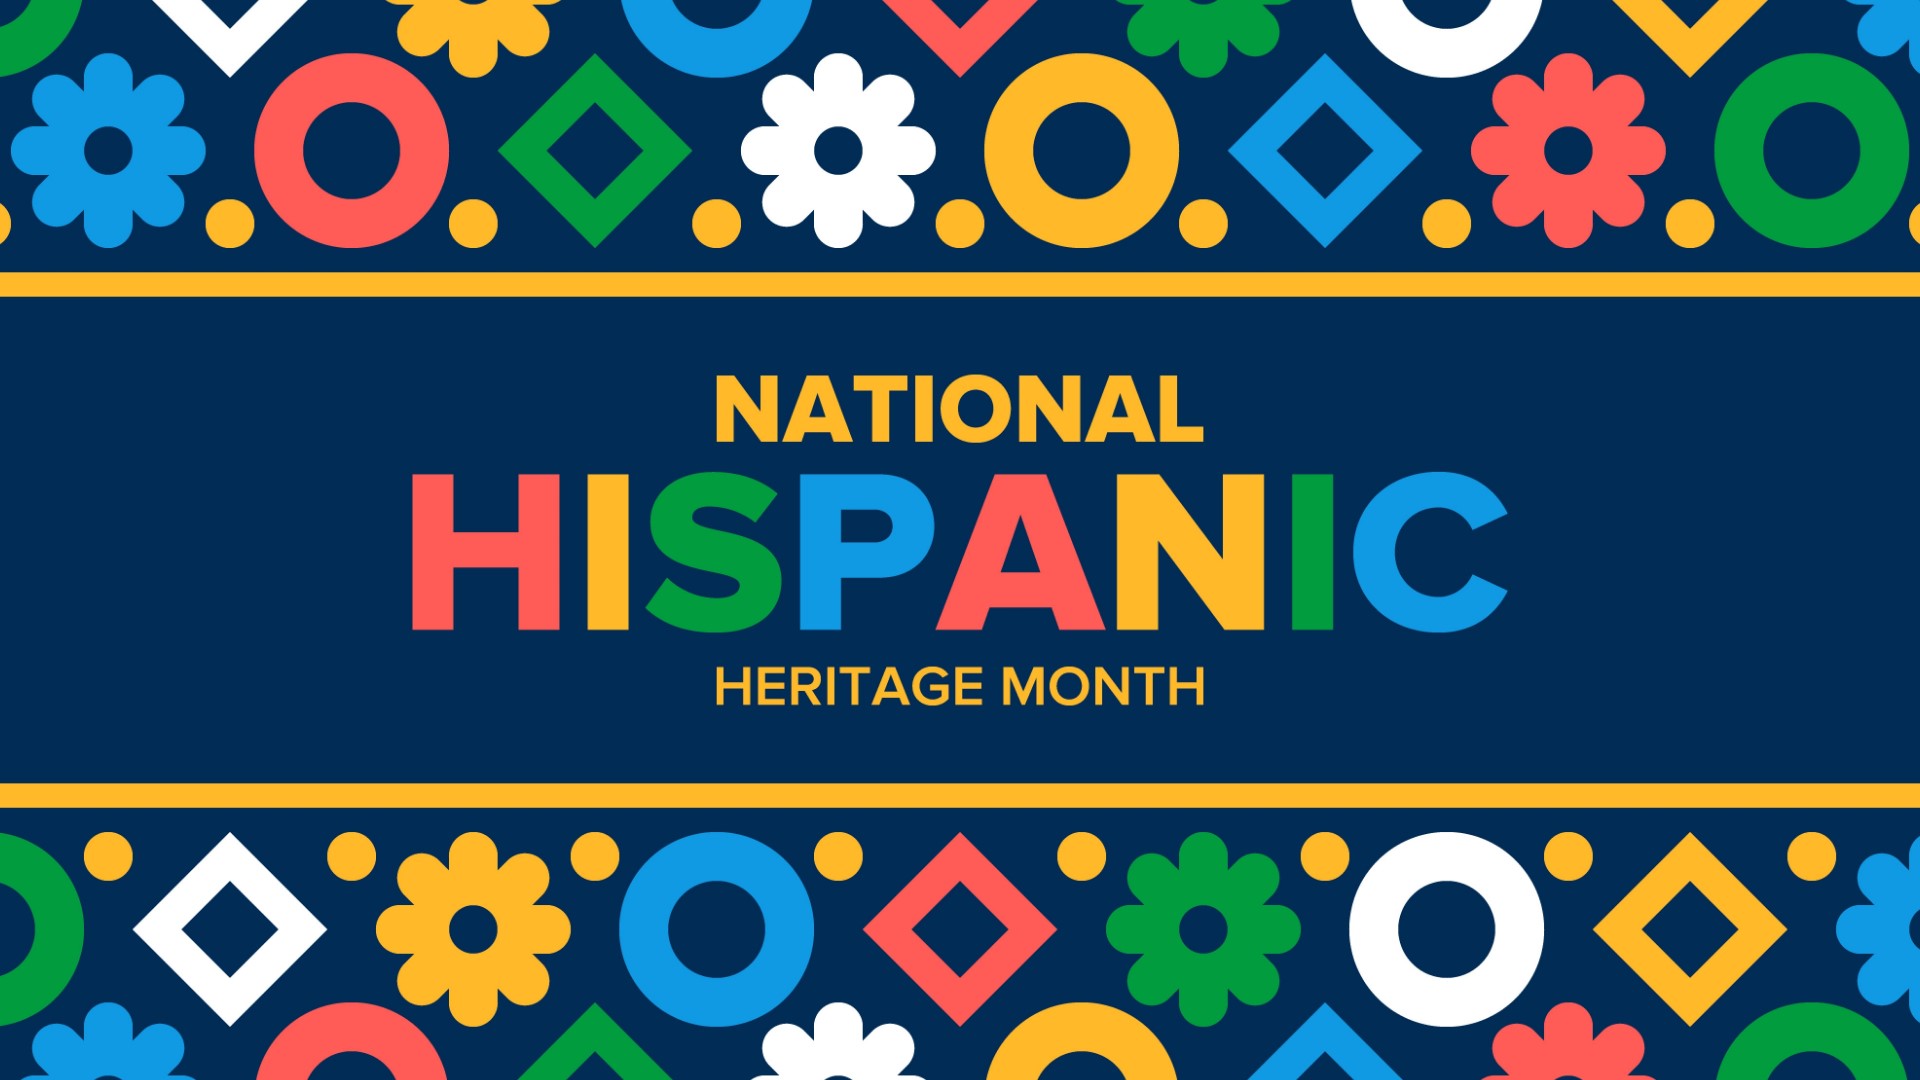 What began as Hispanic Heritage Week in 1968 transformed into a 30-day period of celebrating Hispanic and Latino communities.